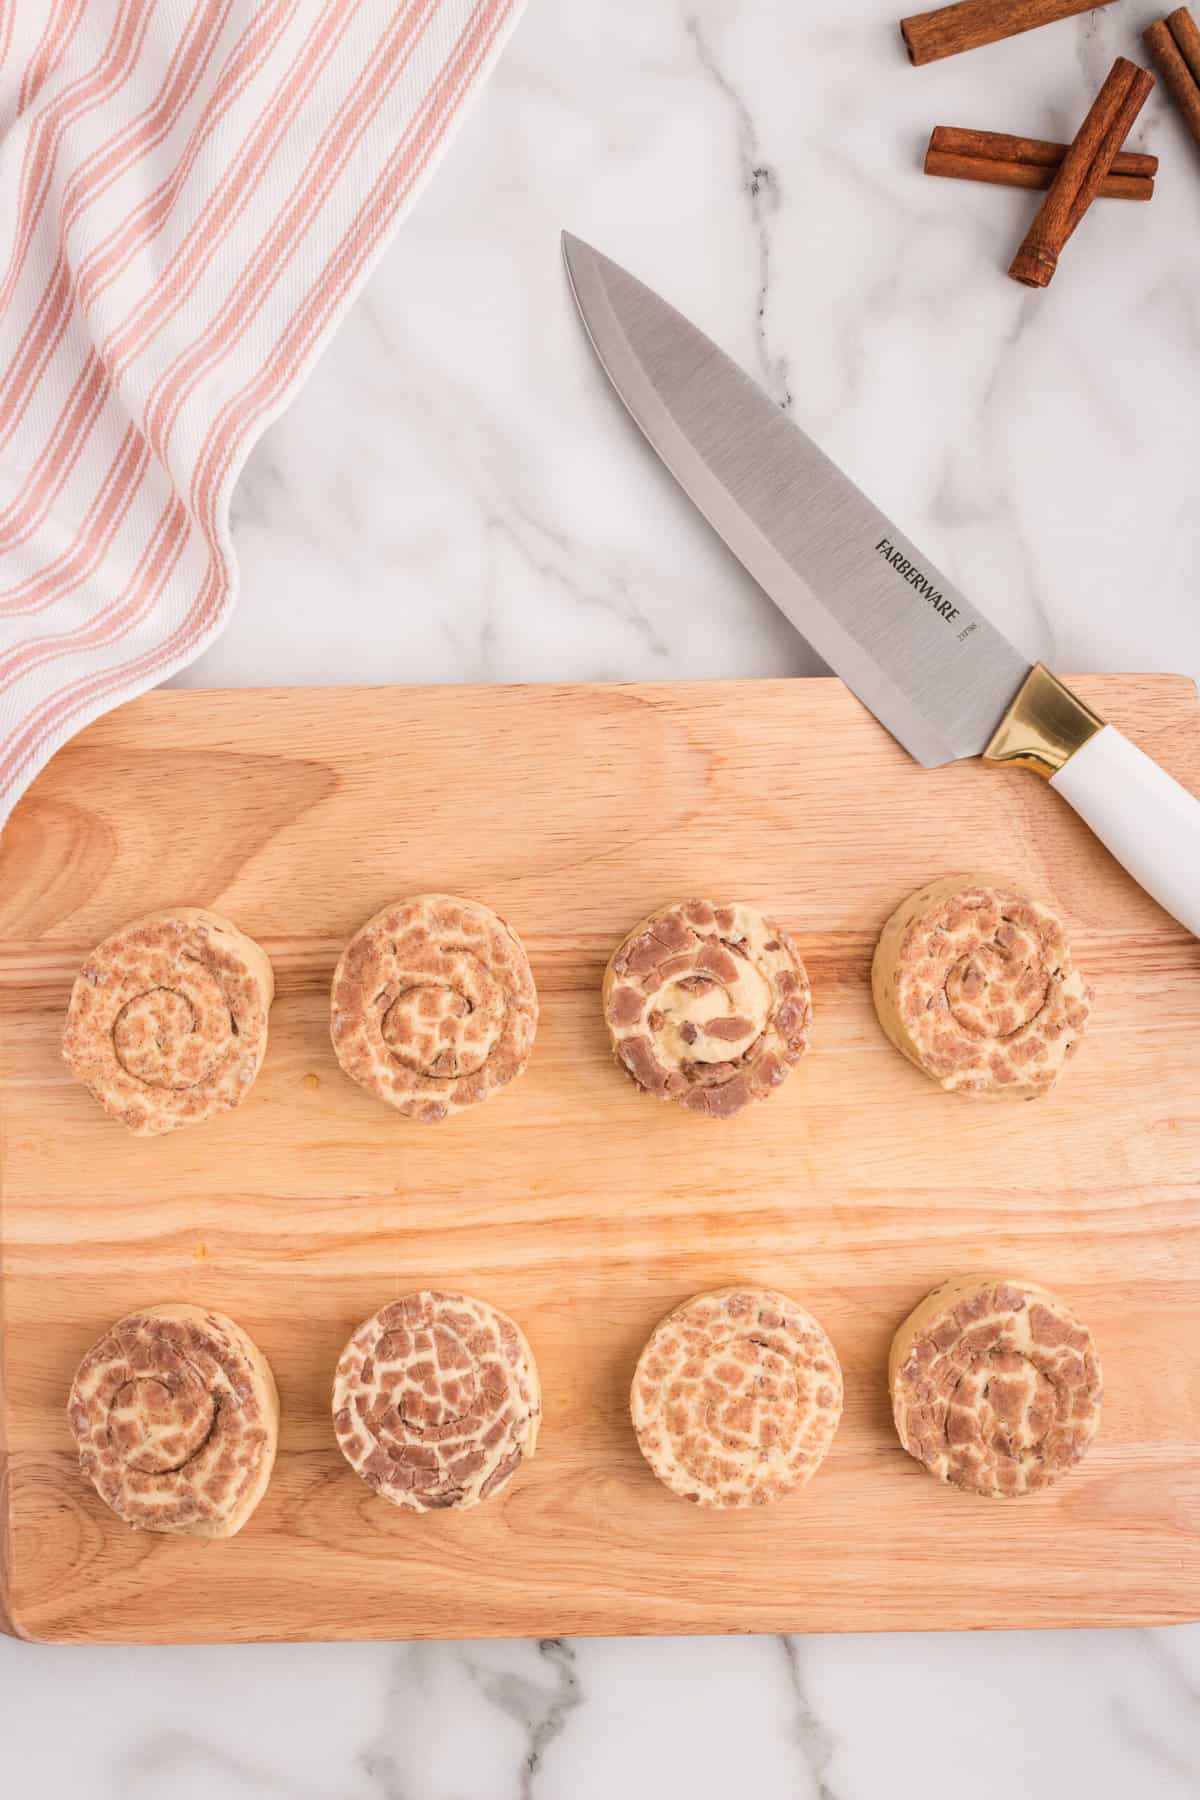 Take the Cinnamon Rolls out of the container and lay them on a cutting board.